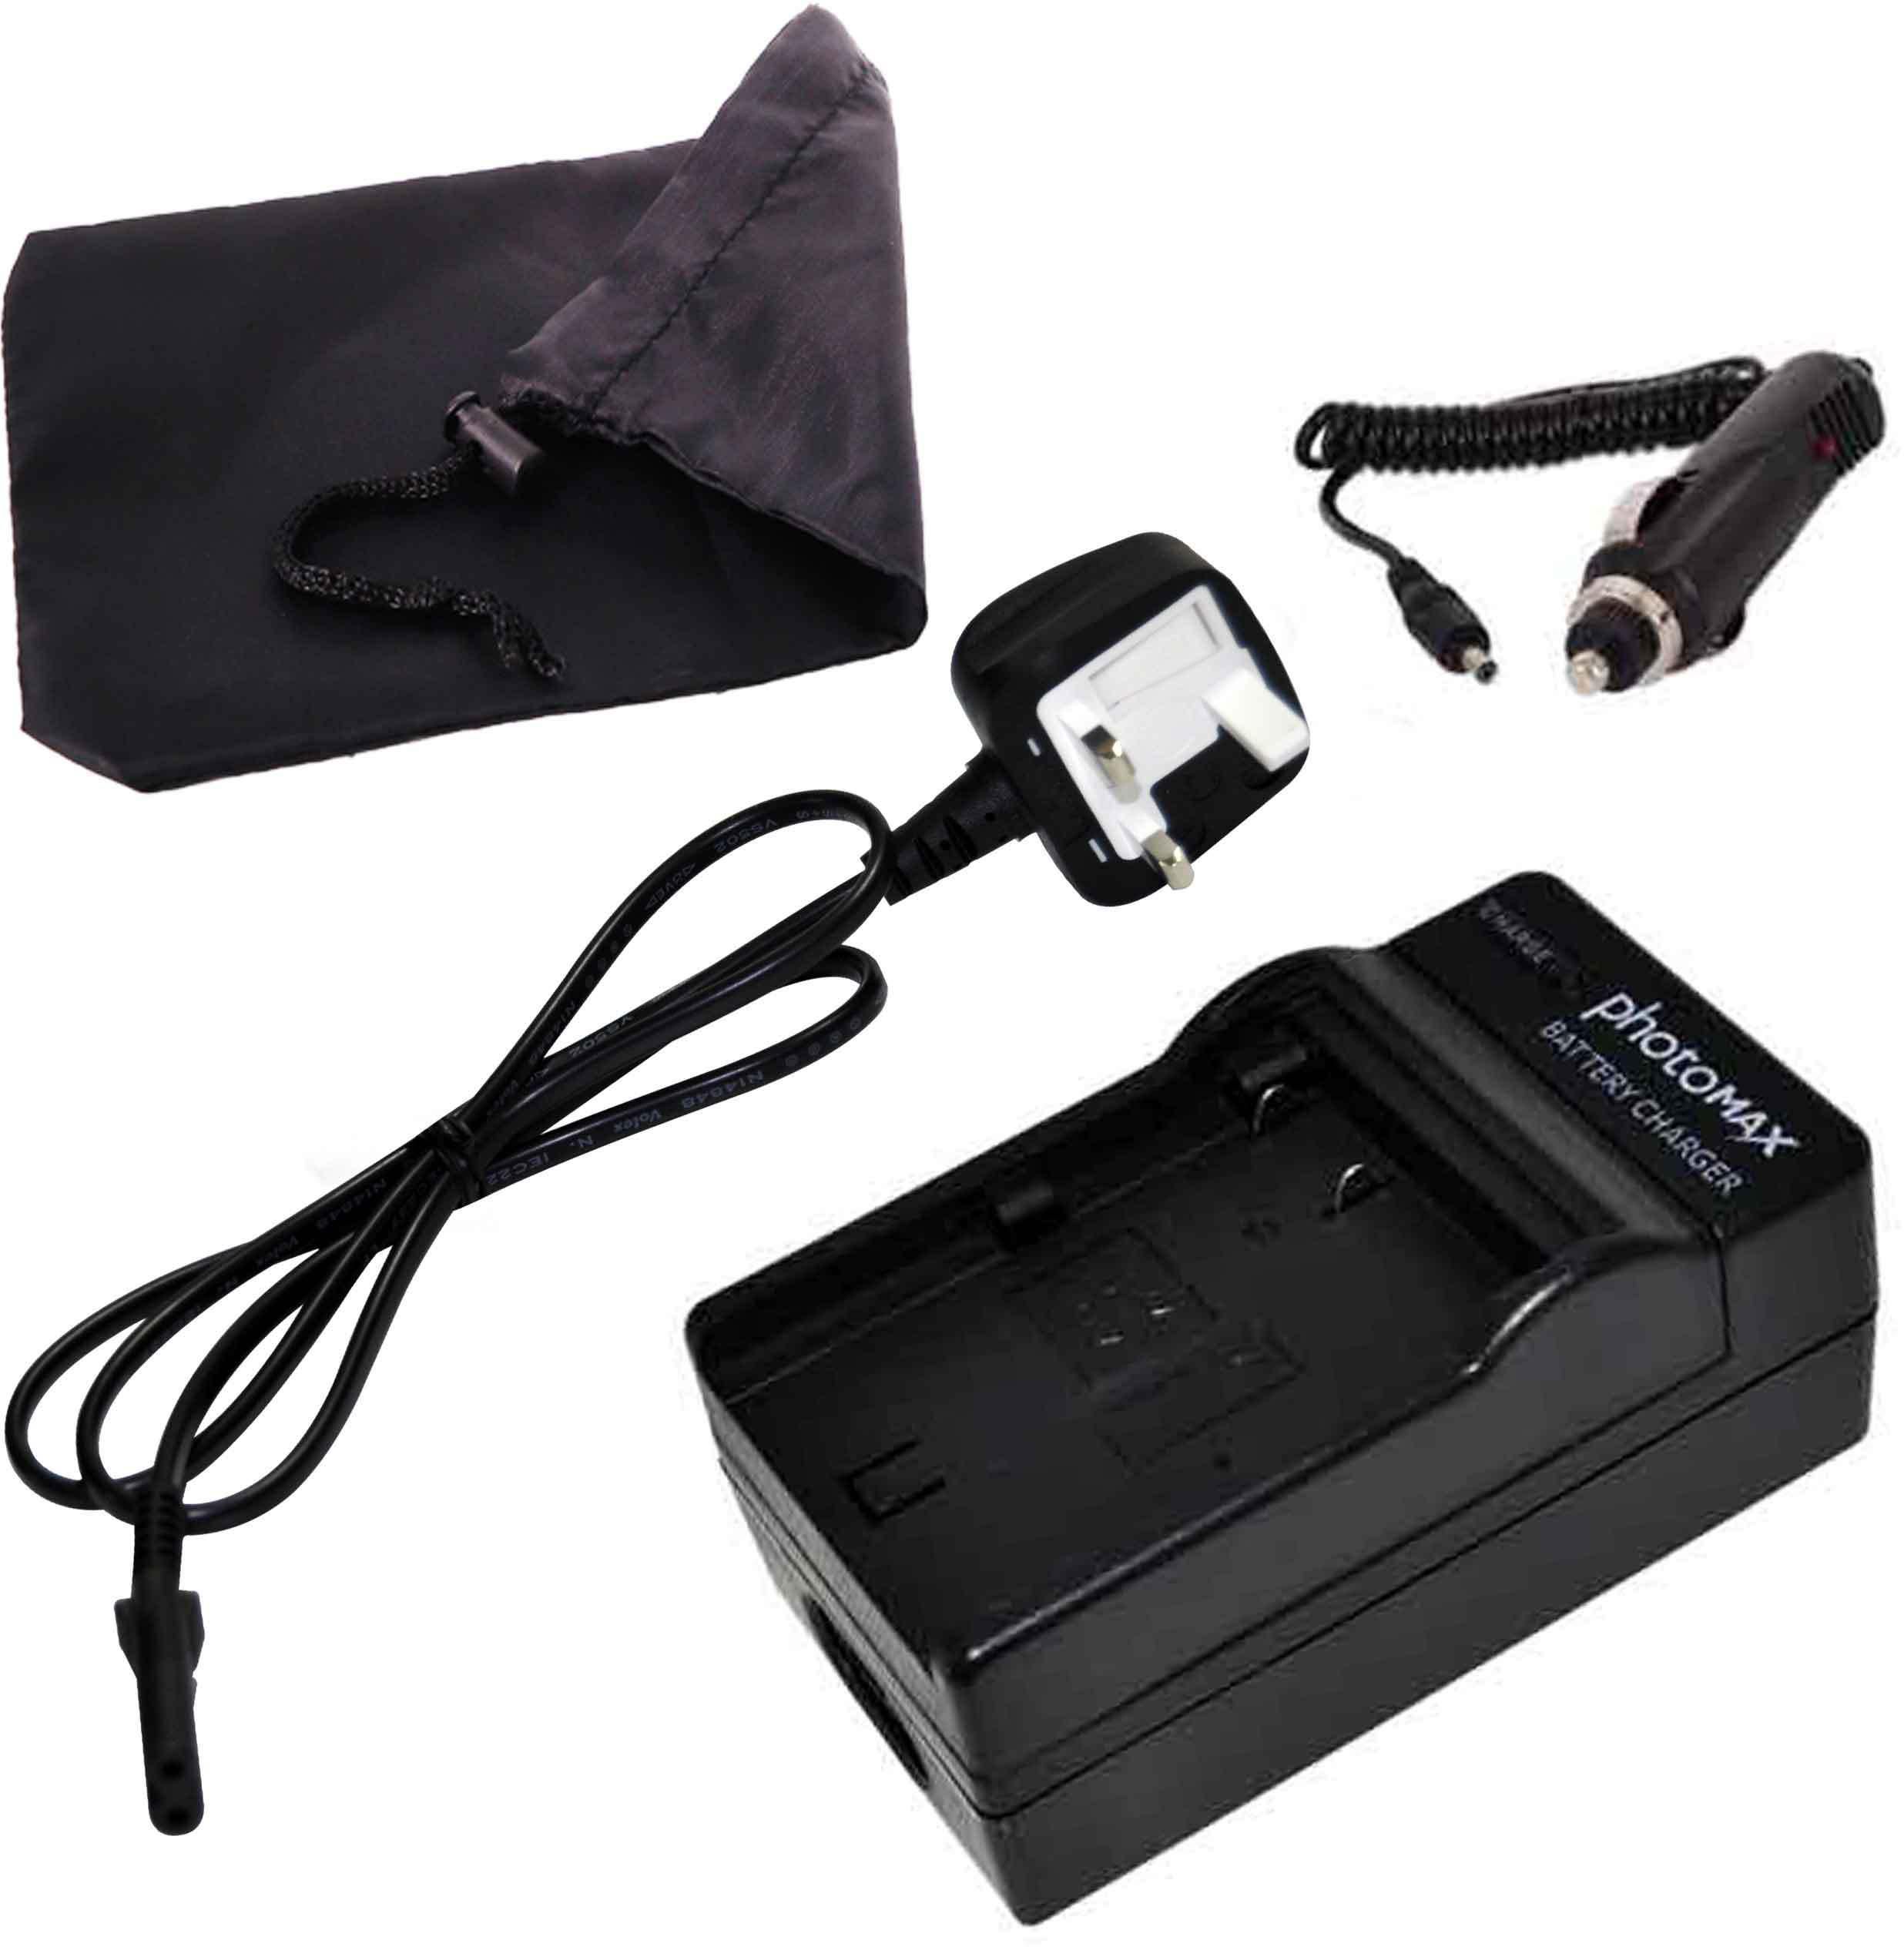 photoMAX Camera Battery Charger with UK Cable for Canon BP-508/ BP-511/ BP-511A/ BP-512/ BP-514